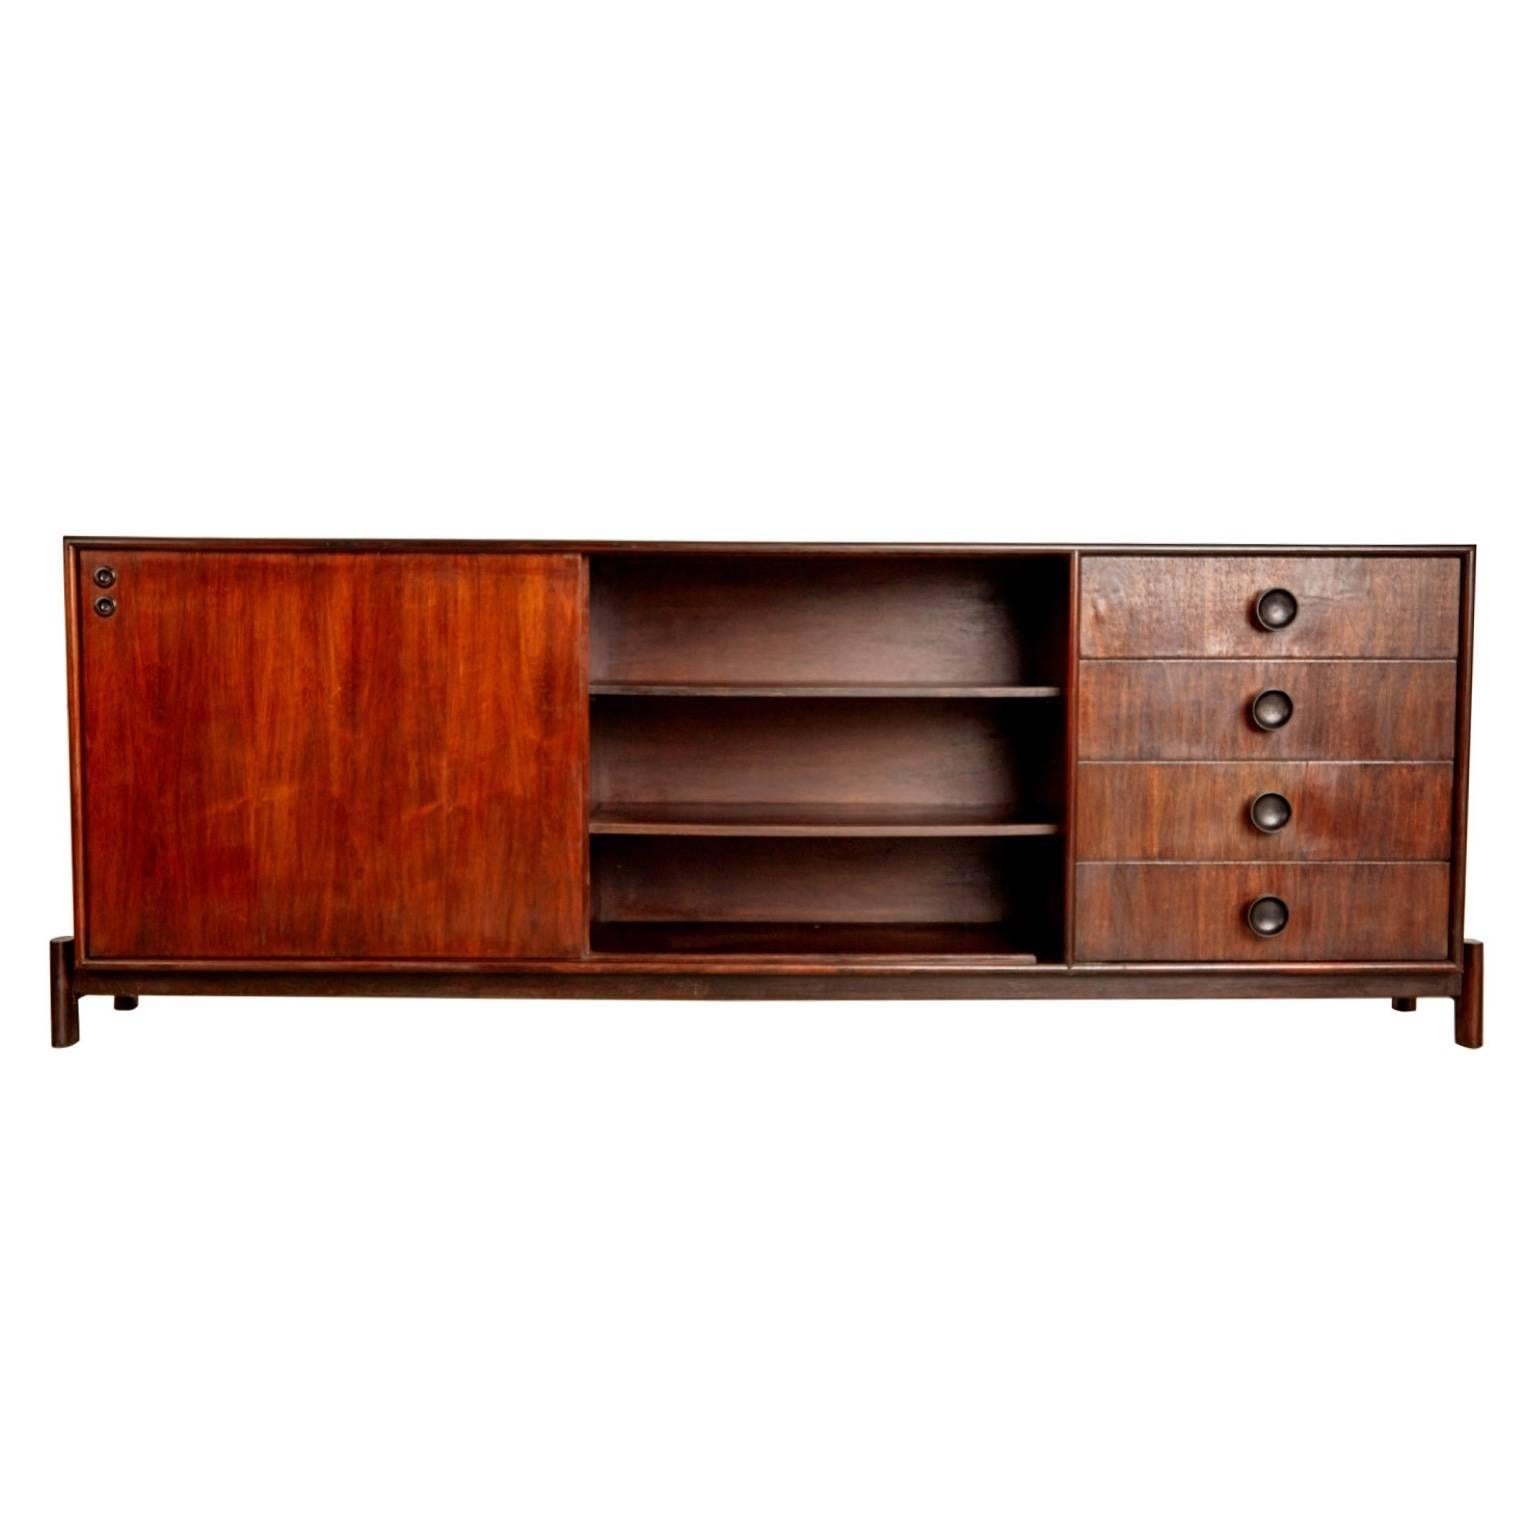 Newly imported from a private collector in Brazil, this impressive credenza by Carlo Hauner for Forma Brazil emulates the quality and innovation of Brazilian Modern design. Fabricated from dark Brazilian rosewood which shows a dramatic grain, this